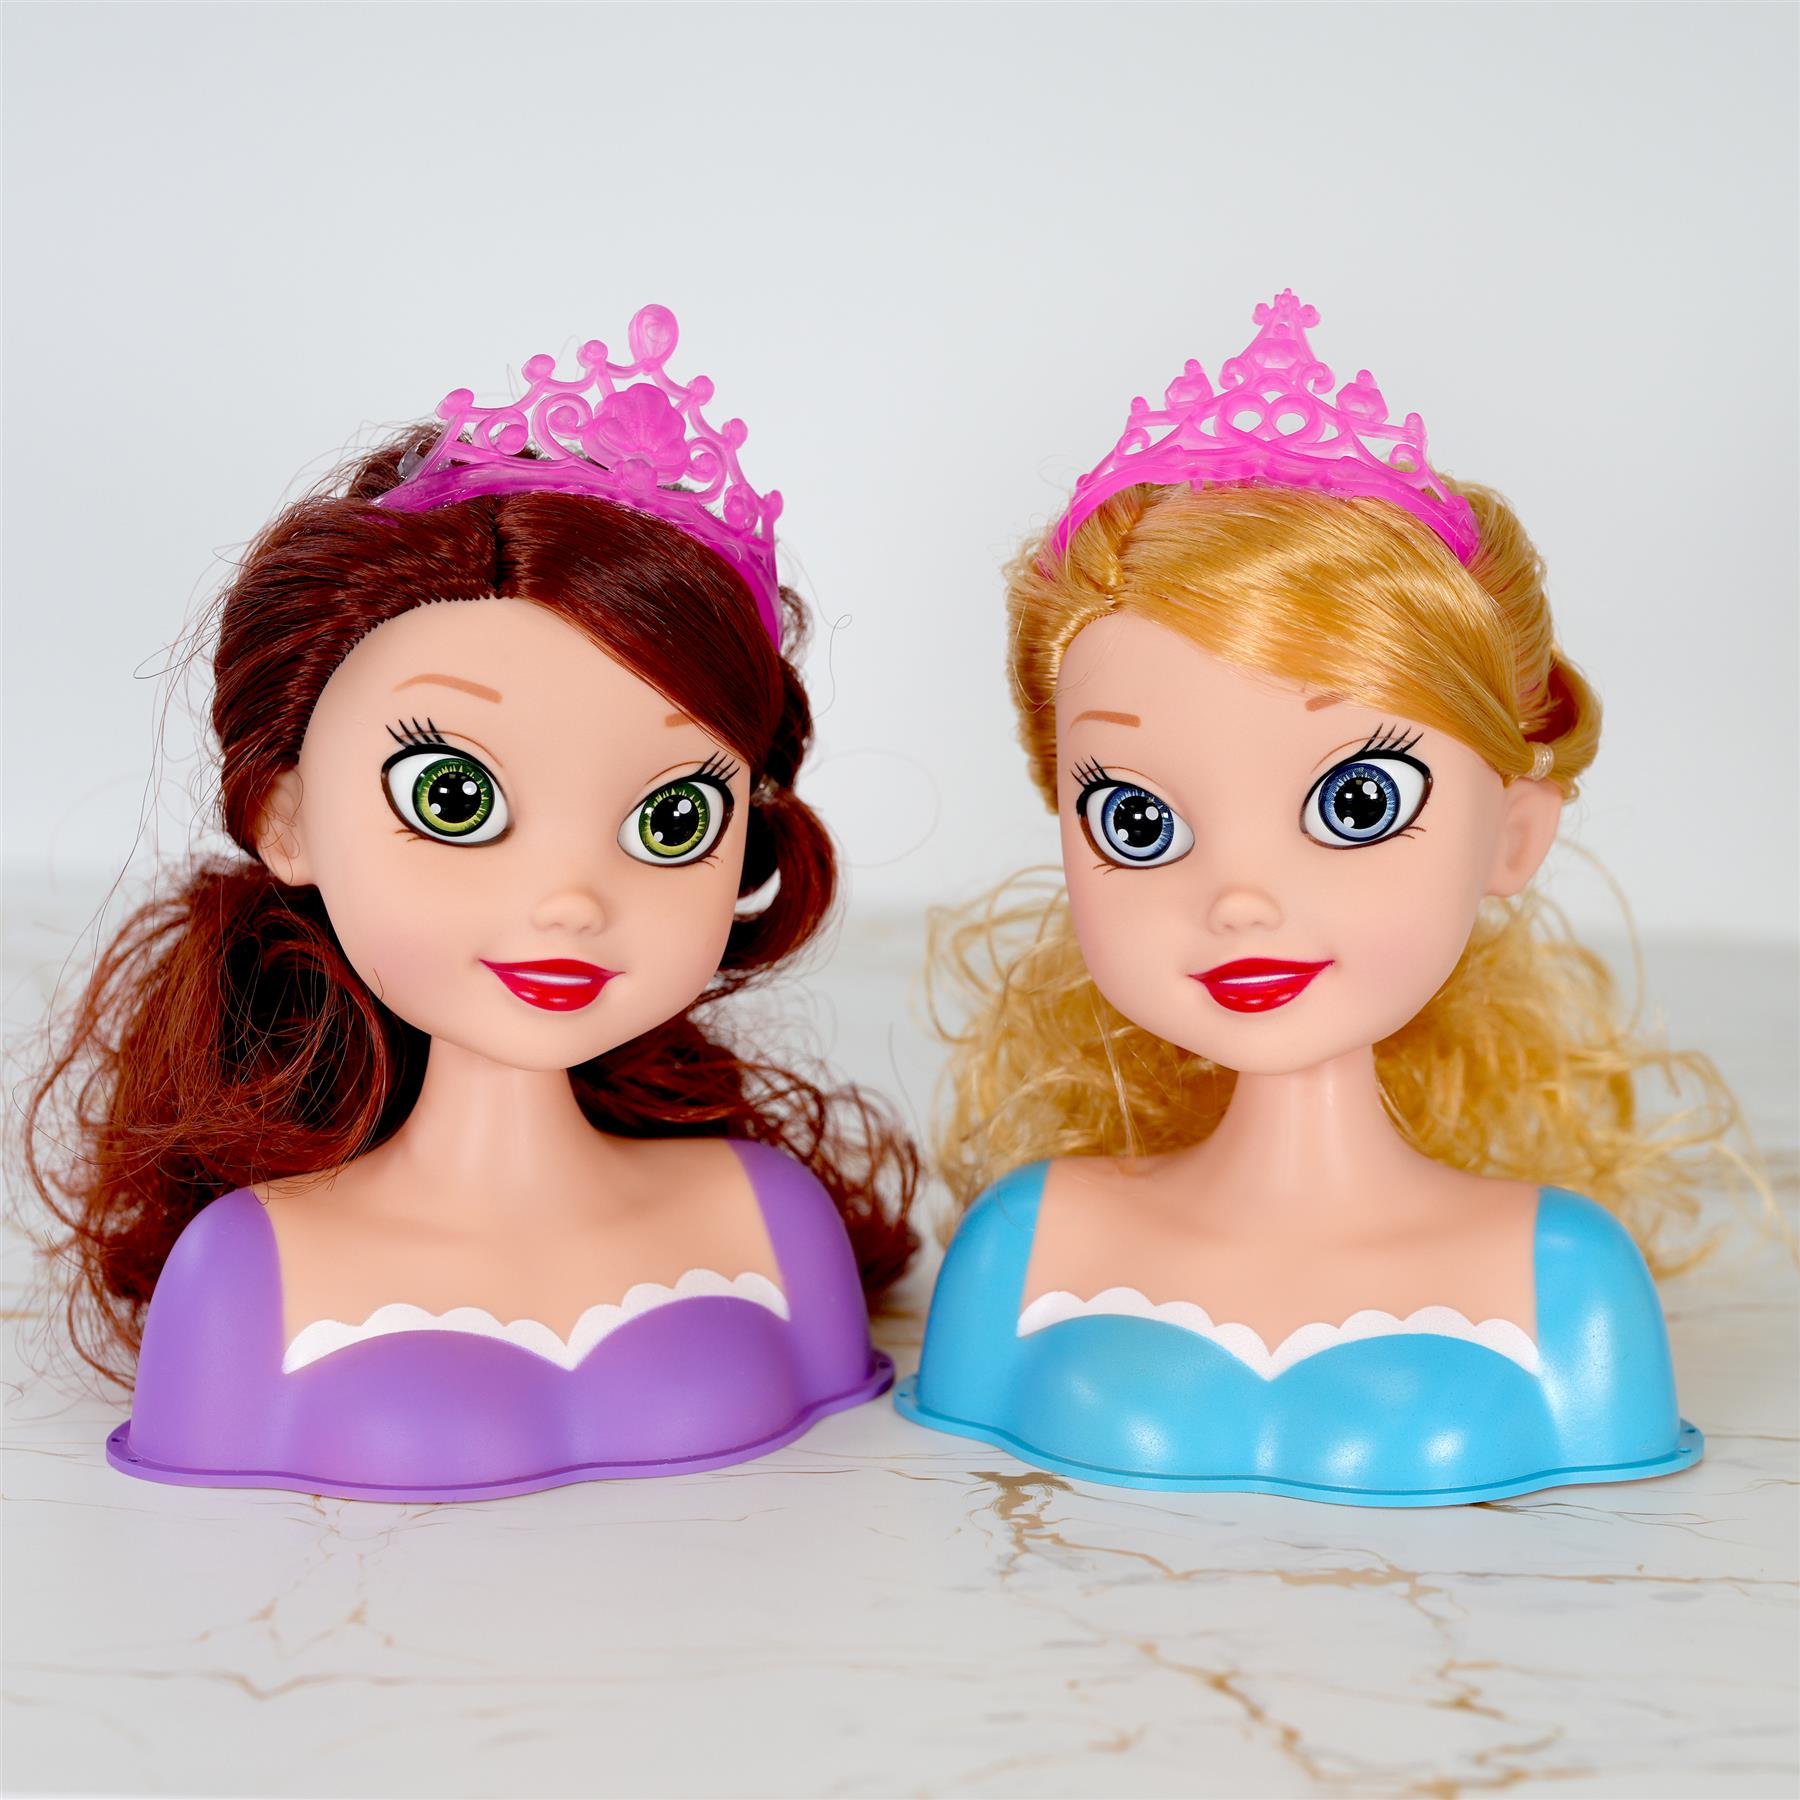 BiBi Doll toyfigure Princess Styling Head with Hair Accessories